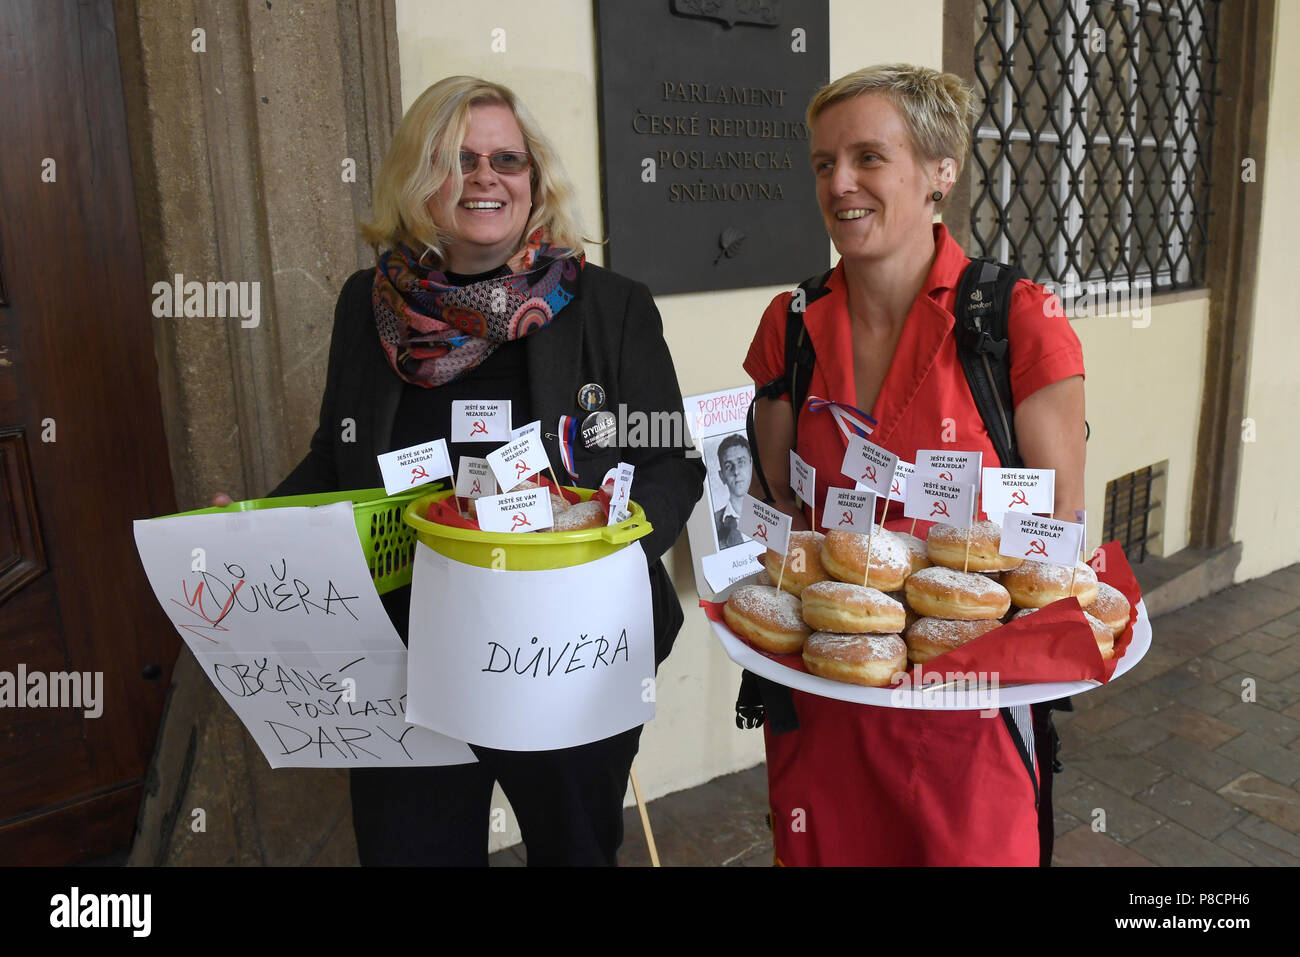 Prague, Czech Republic. 11th July, 2018. Protesters against Babis's government gives donuts with the hammer and sickle communist symbol in front of a Chamber of Deputies of the Czech Republic building in Prague, Czech Republic, on July 11, 2018, prior to the Chamber of Deputies session on confidence in minority government of ANO and CSSD. Government supporters PM's got a donut with the communist symbol and opponents PM's got a Czech tricolor. Credit: Michal Krumphanzl/CTK Photo/Alamy Live News Stock Photo